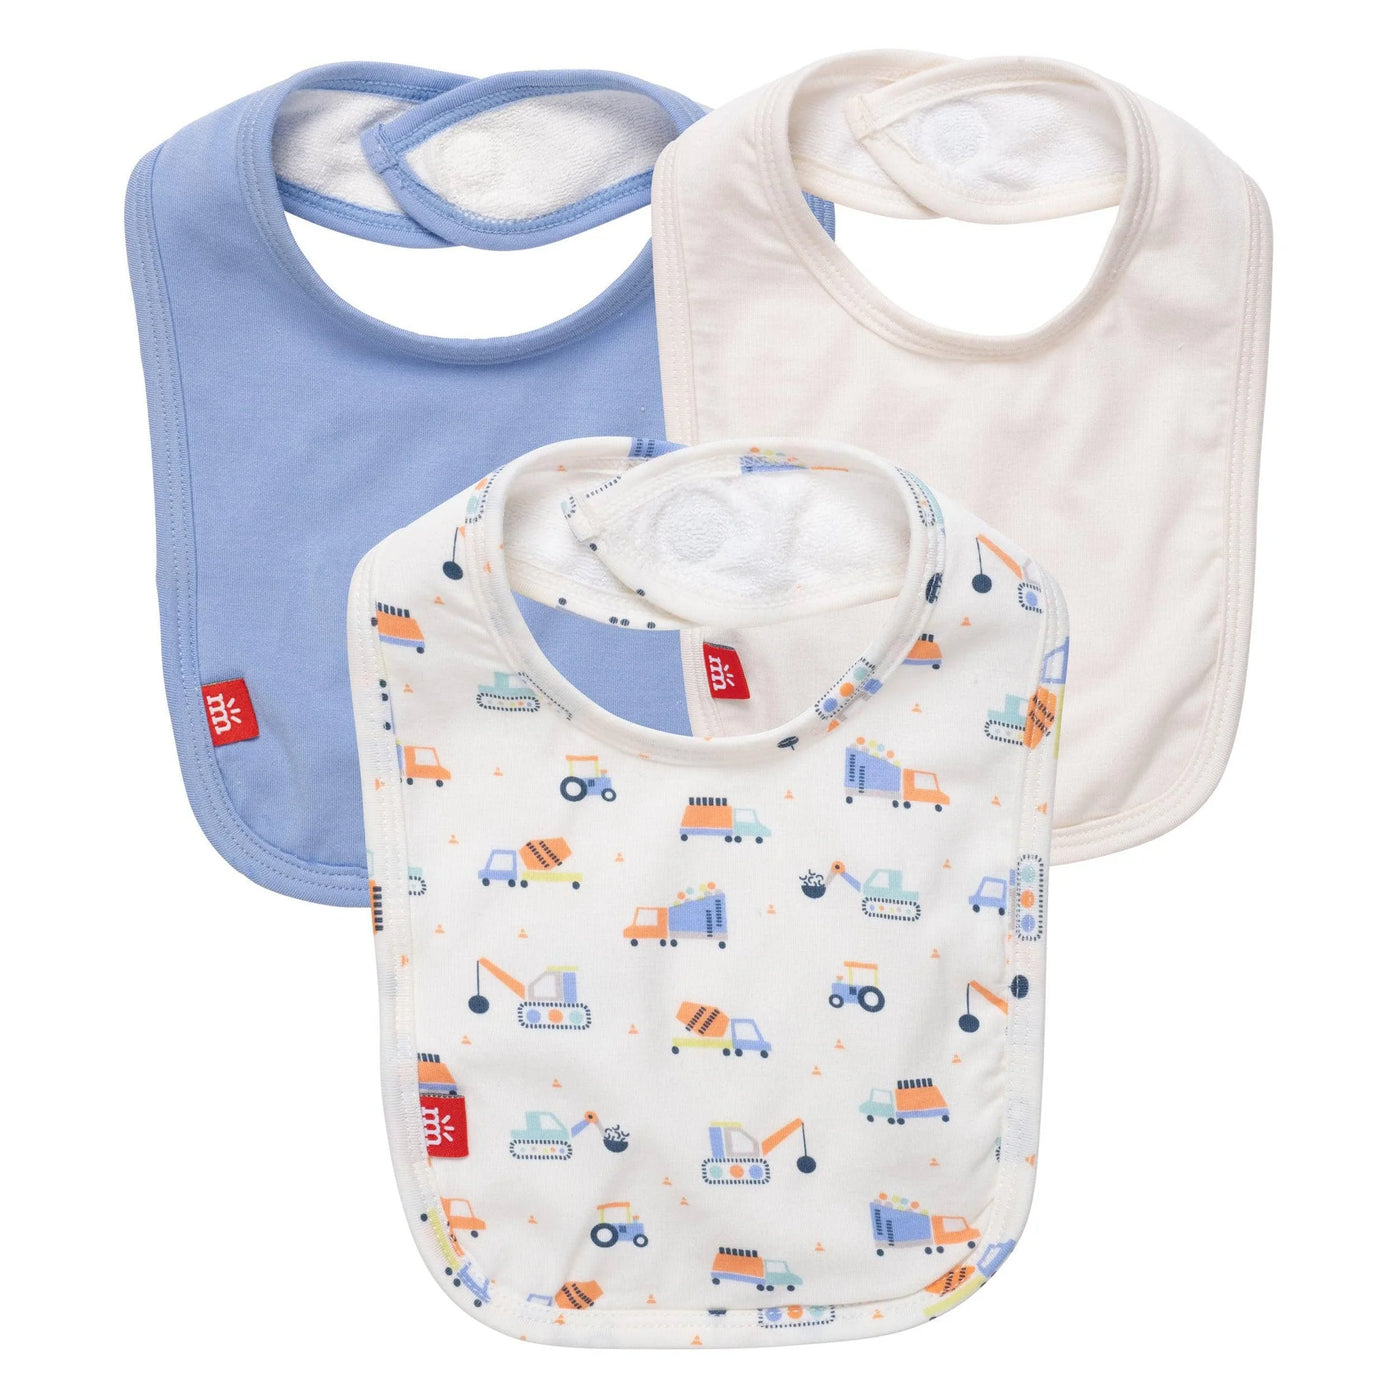 can you dig it 3 pack bibs